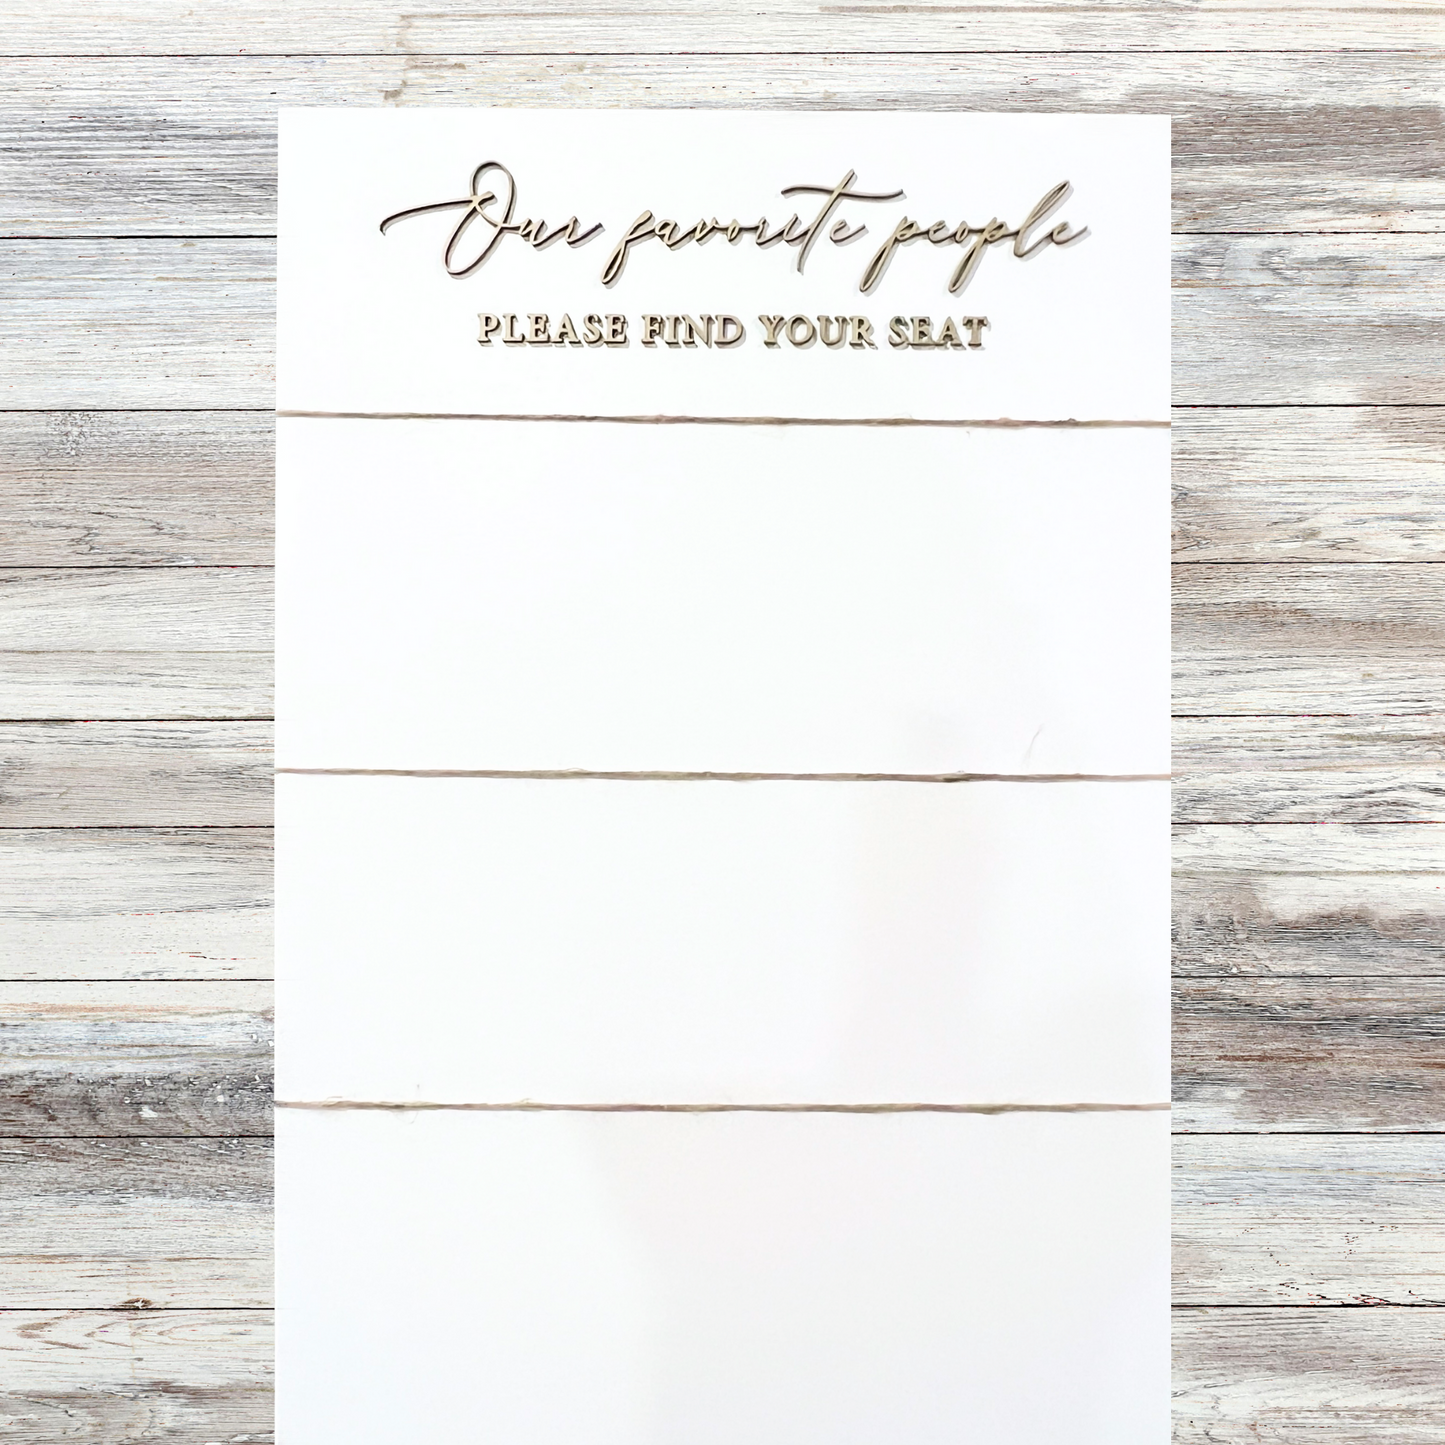 3D Our Favorite People Please Find Your Seat Wedding Seating Chart Sign